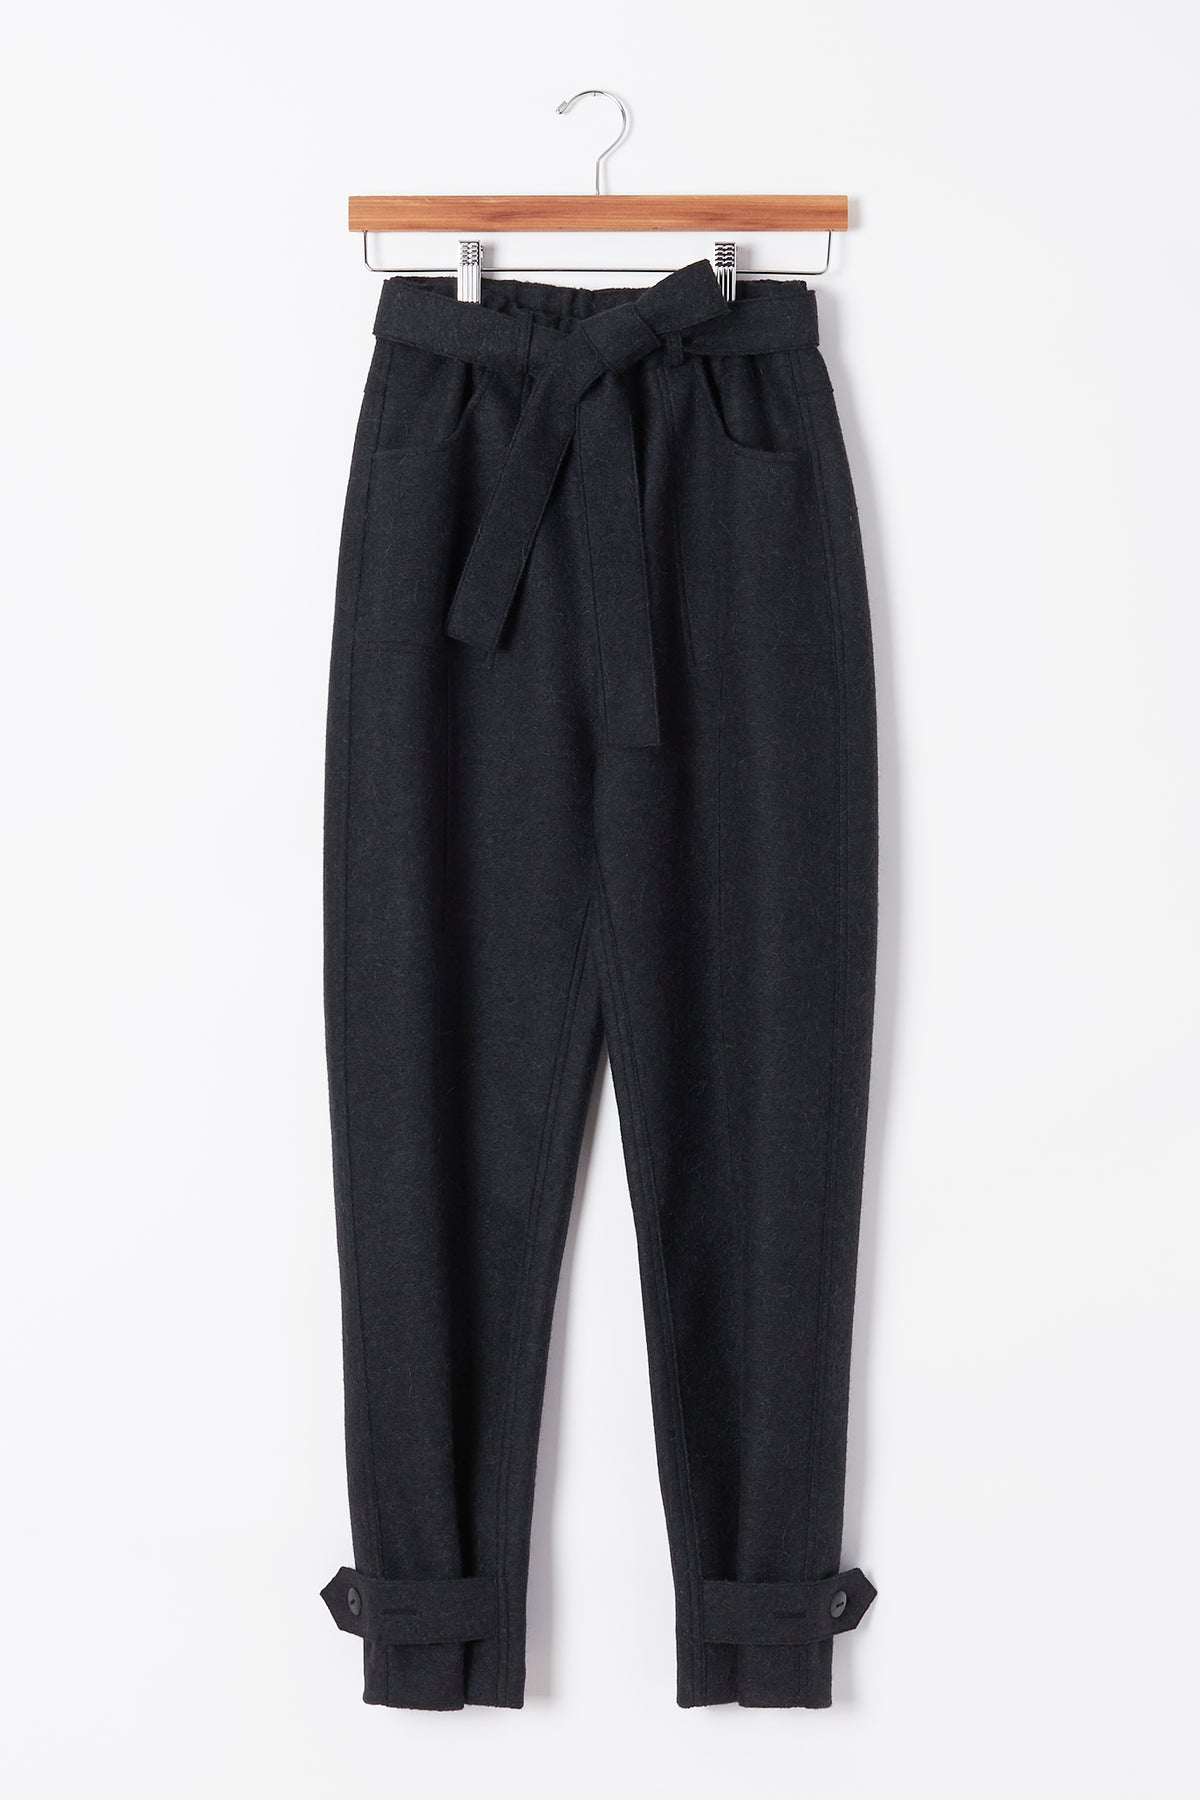 Adult Field Pant - Licorice